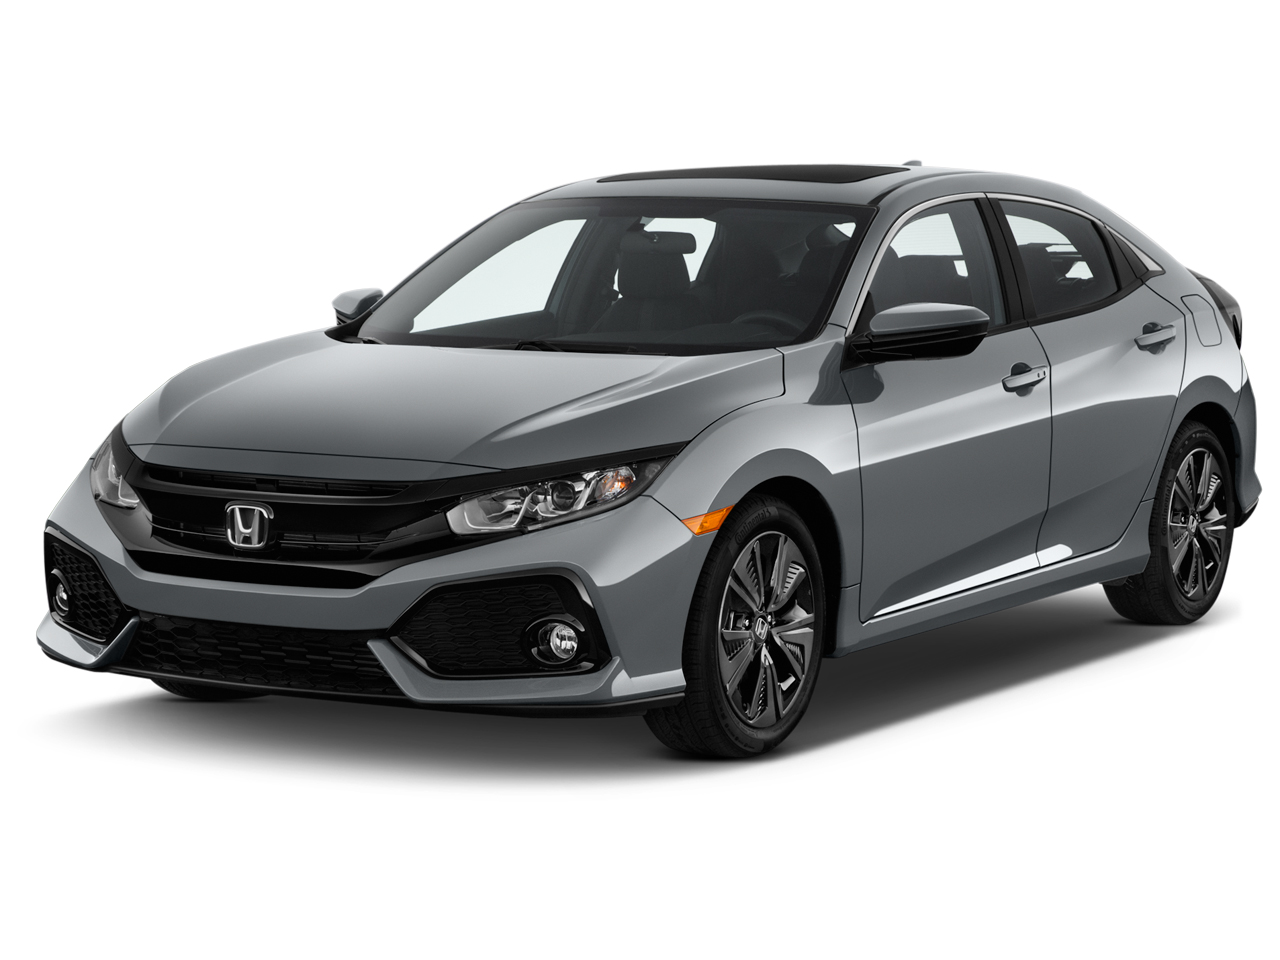 2018 Honda Civic Hatchback Review, Ratings, Specs, Prices, and Photos - The Car Connection